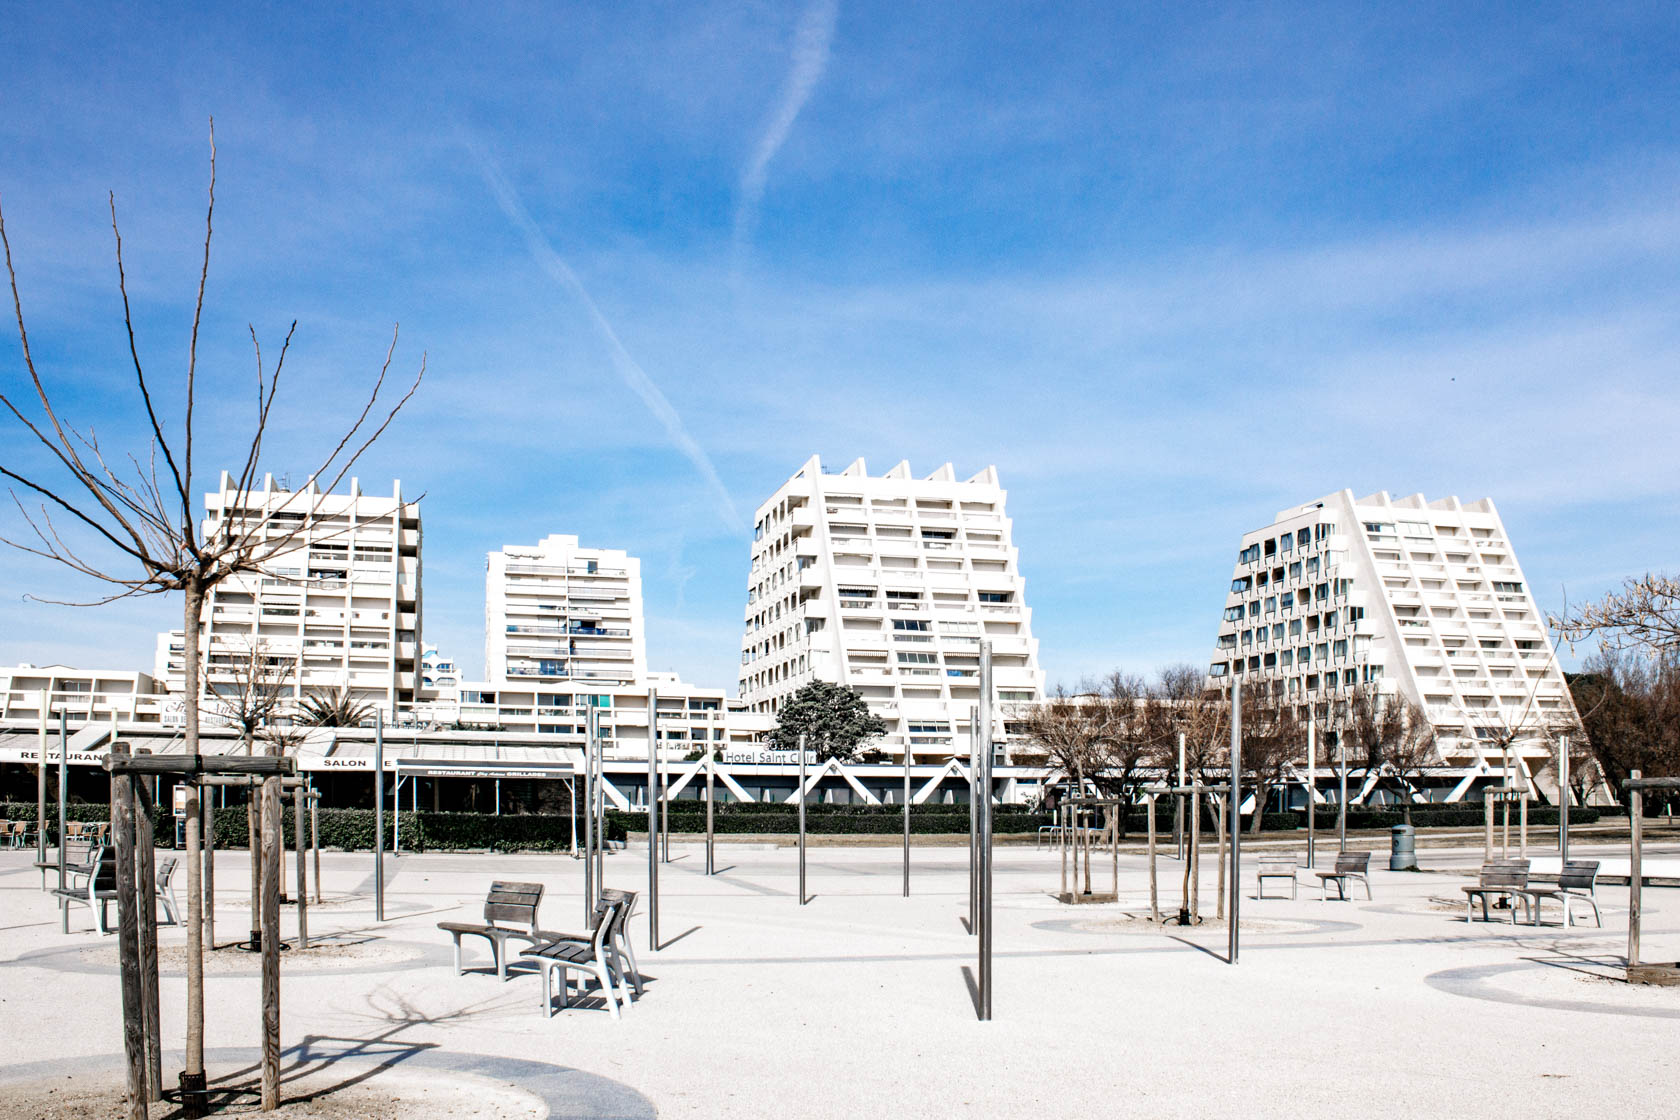 Mid-rise buildings by the beach at La Grande Motte, France